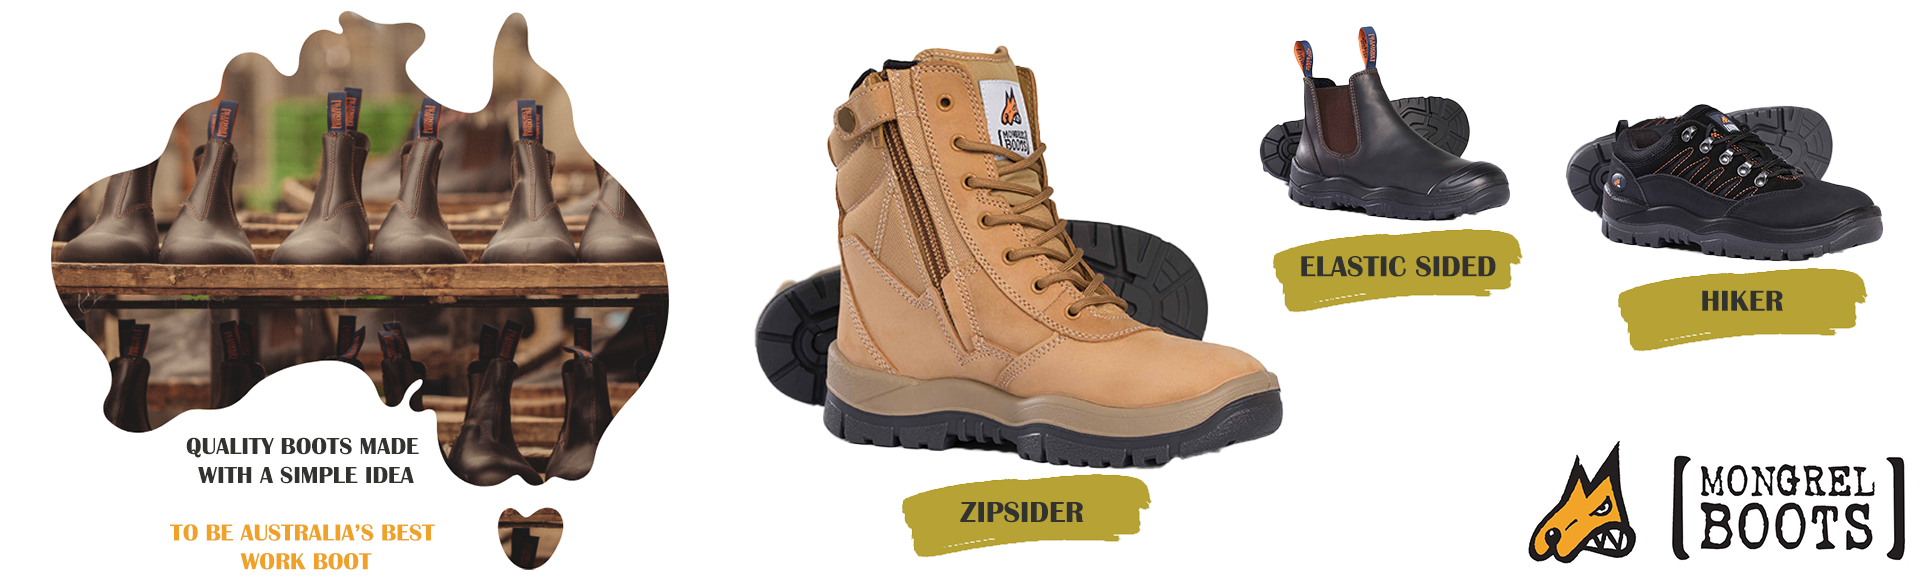 Mongrel Safety Boots